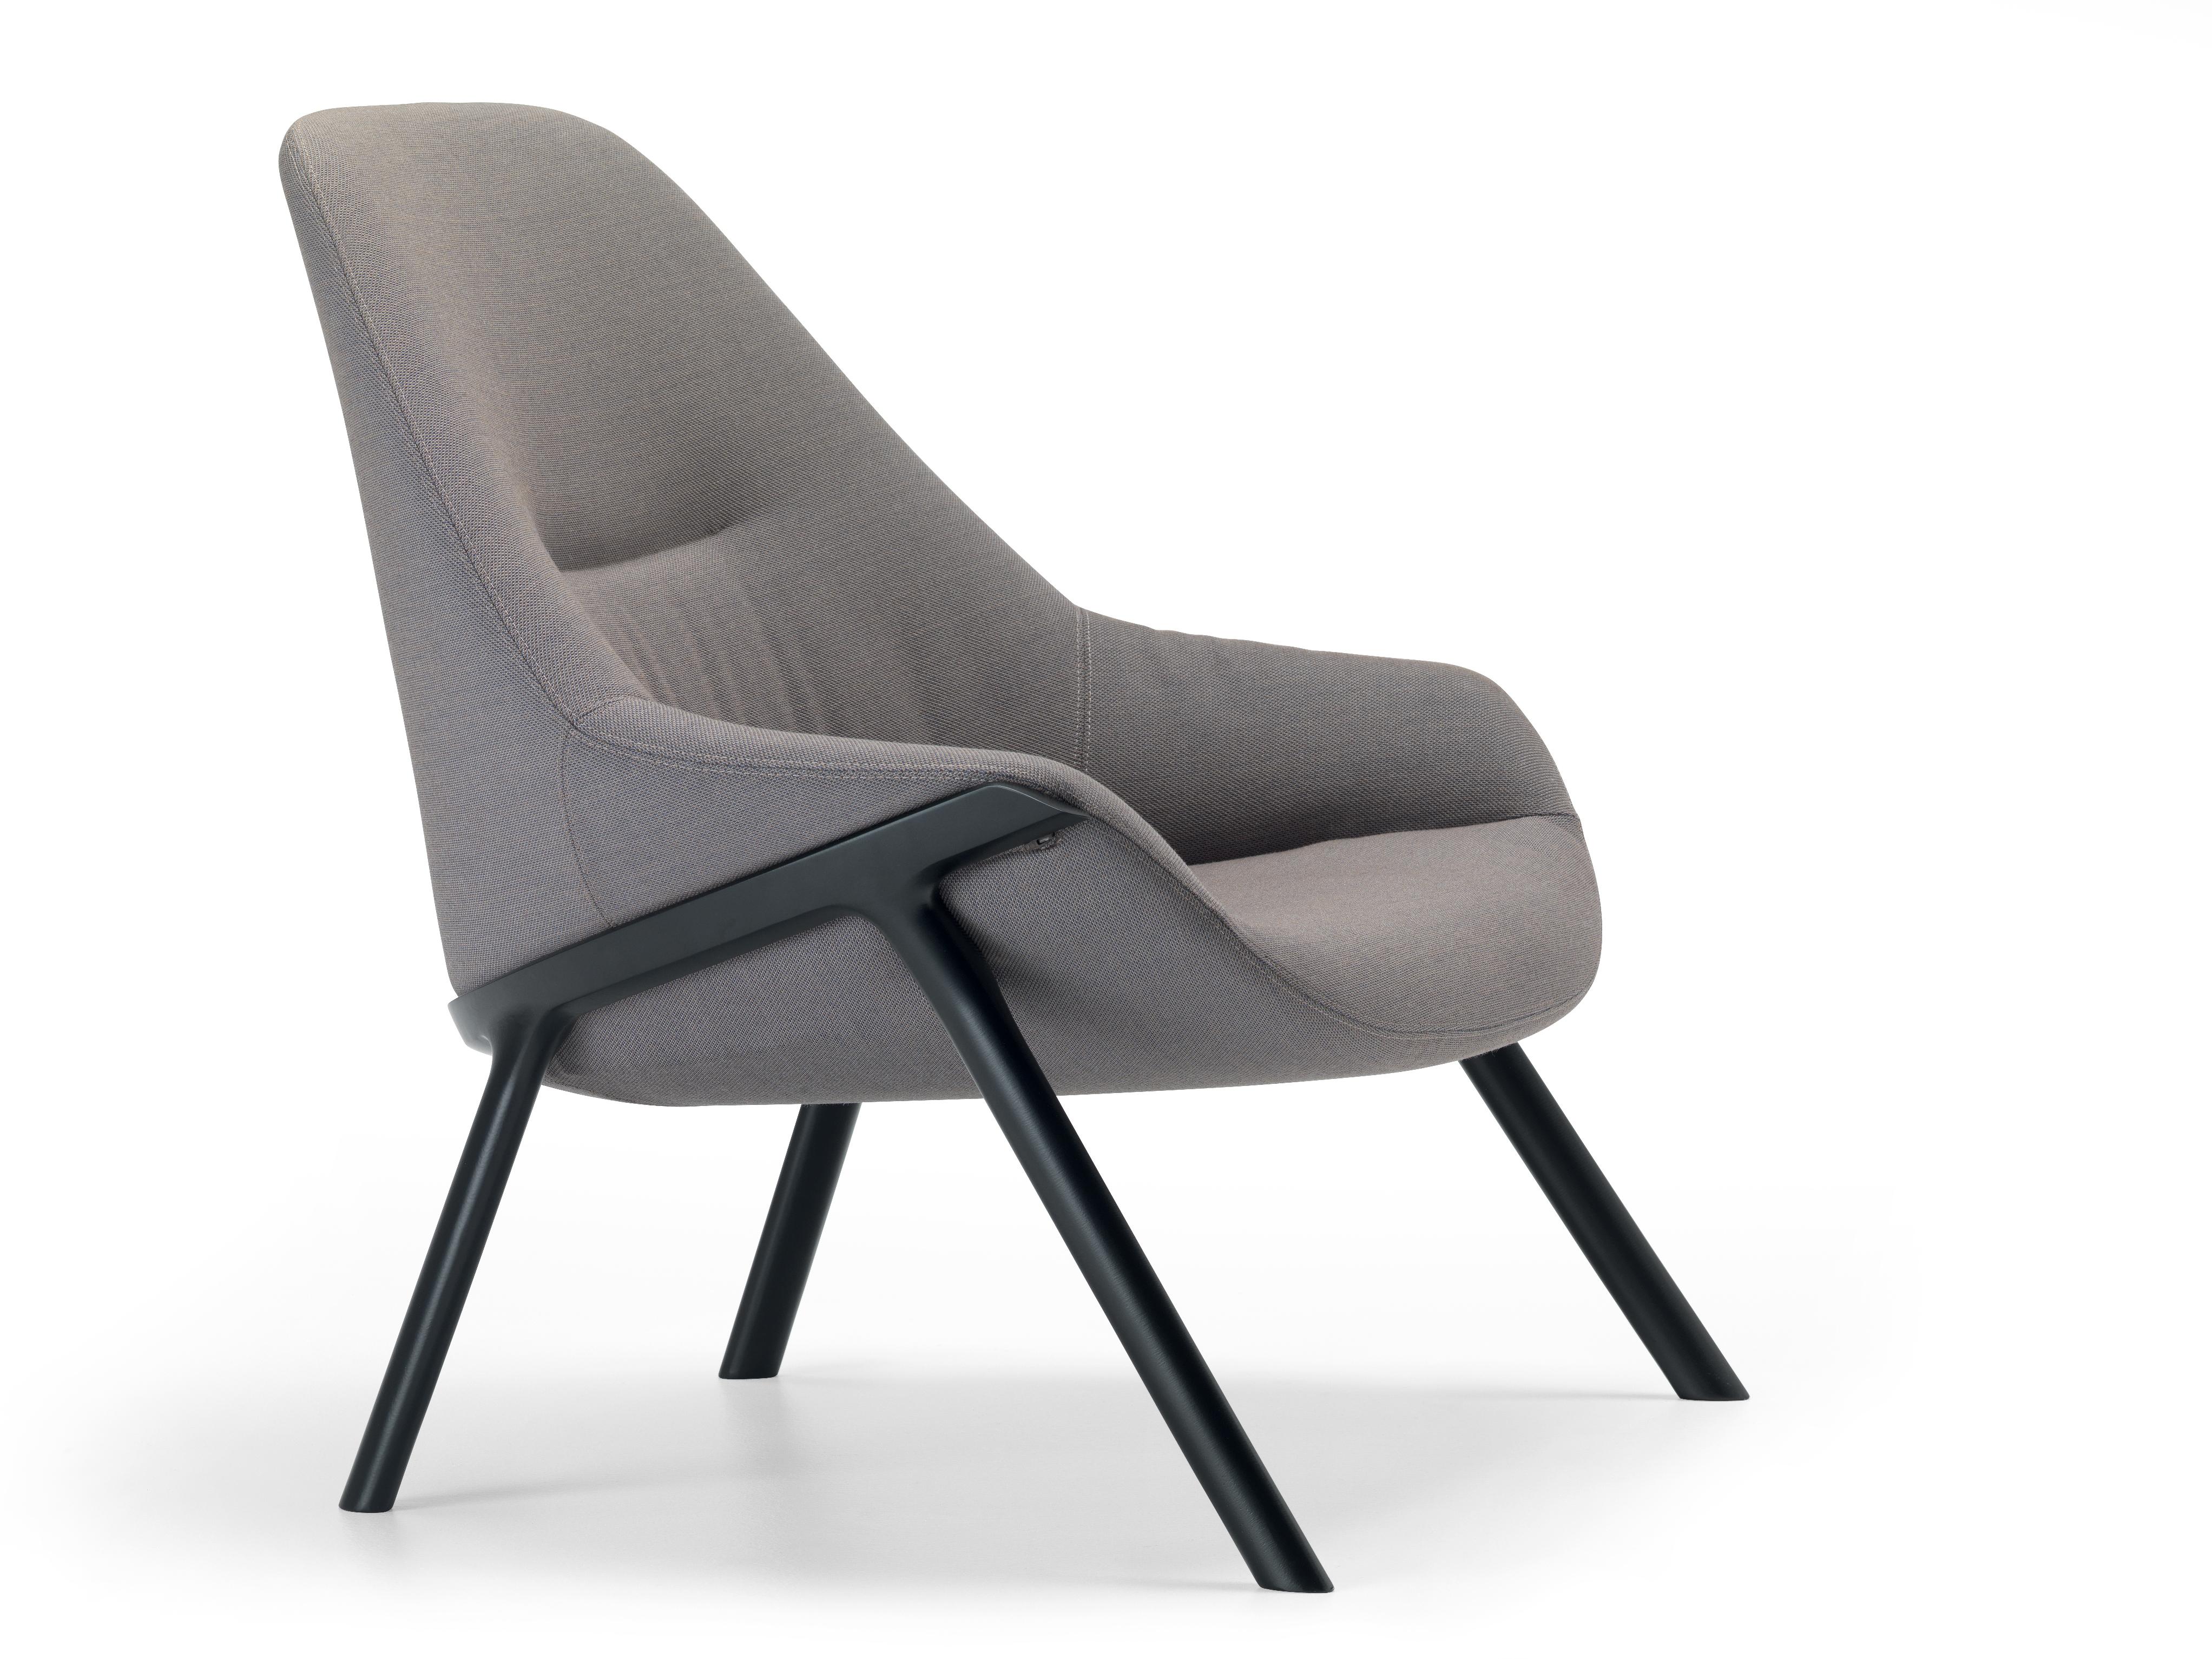 Alias 038 Gran Kobi Essentiel Armchair with Grey Seat and Black Lacquered Frame by Patrick Norguet

Armchair with structure in lacquered aluminium. Cushion in expanded polyurethane with cover in fabric or leather.Cover is not removable.It is